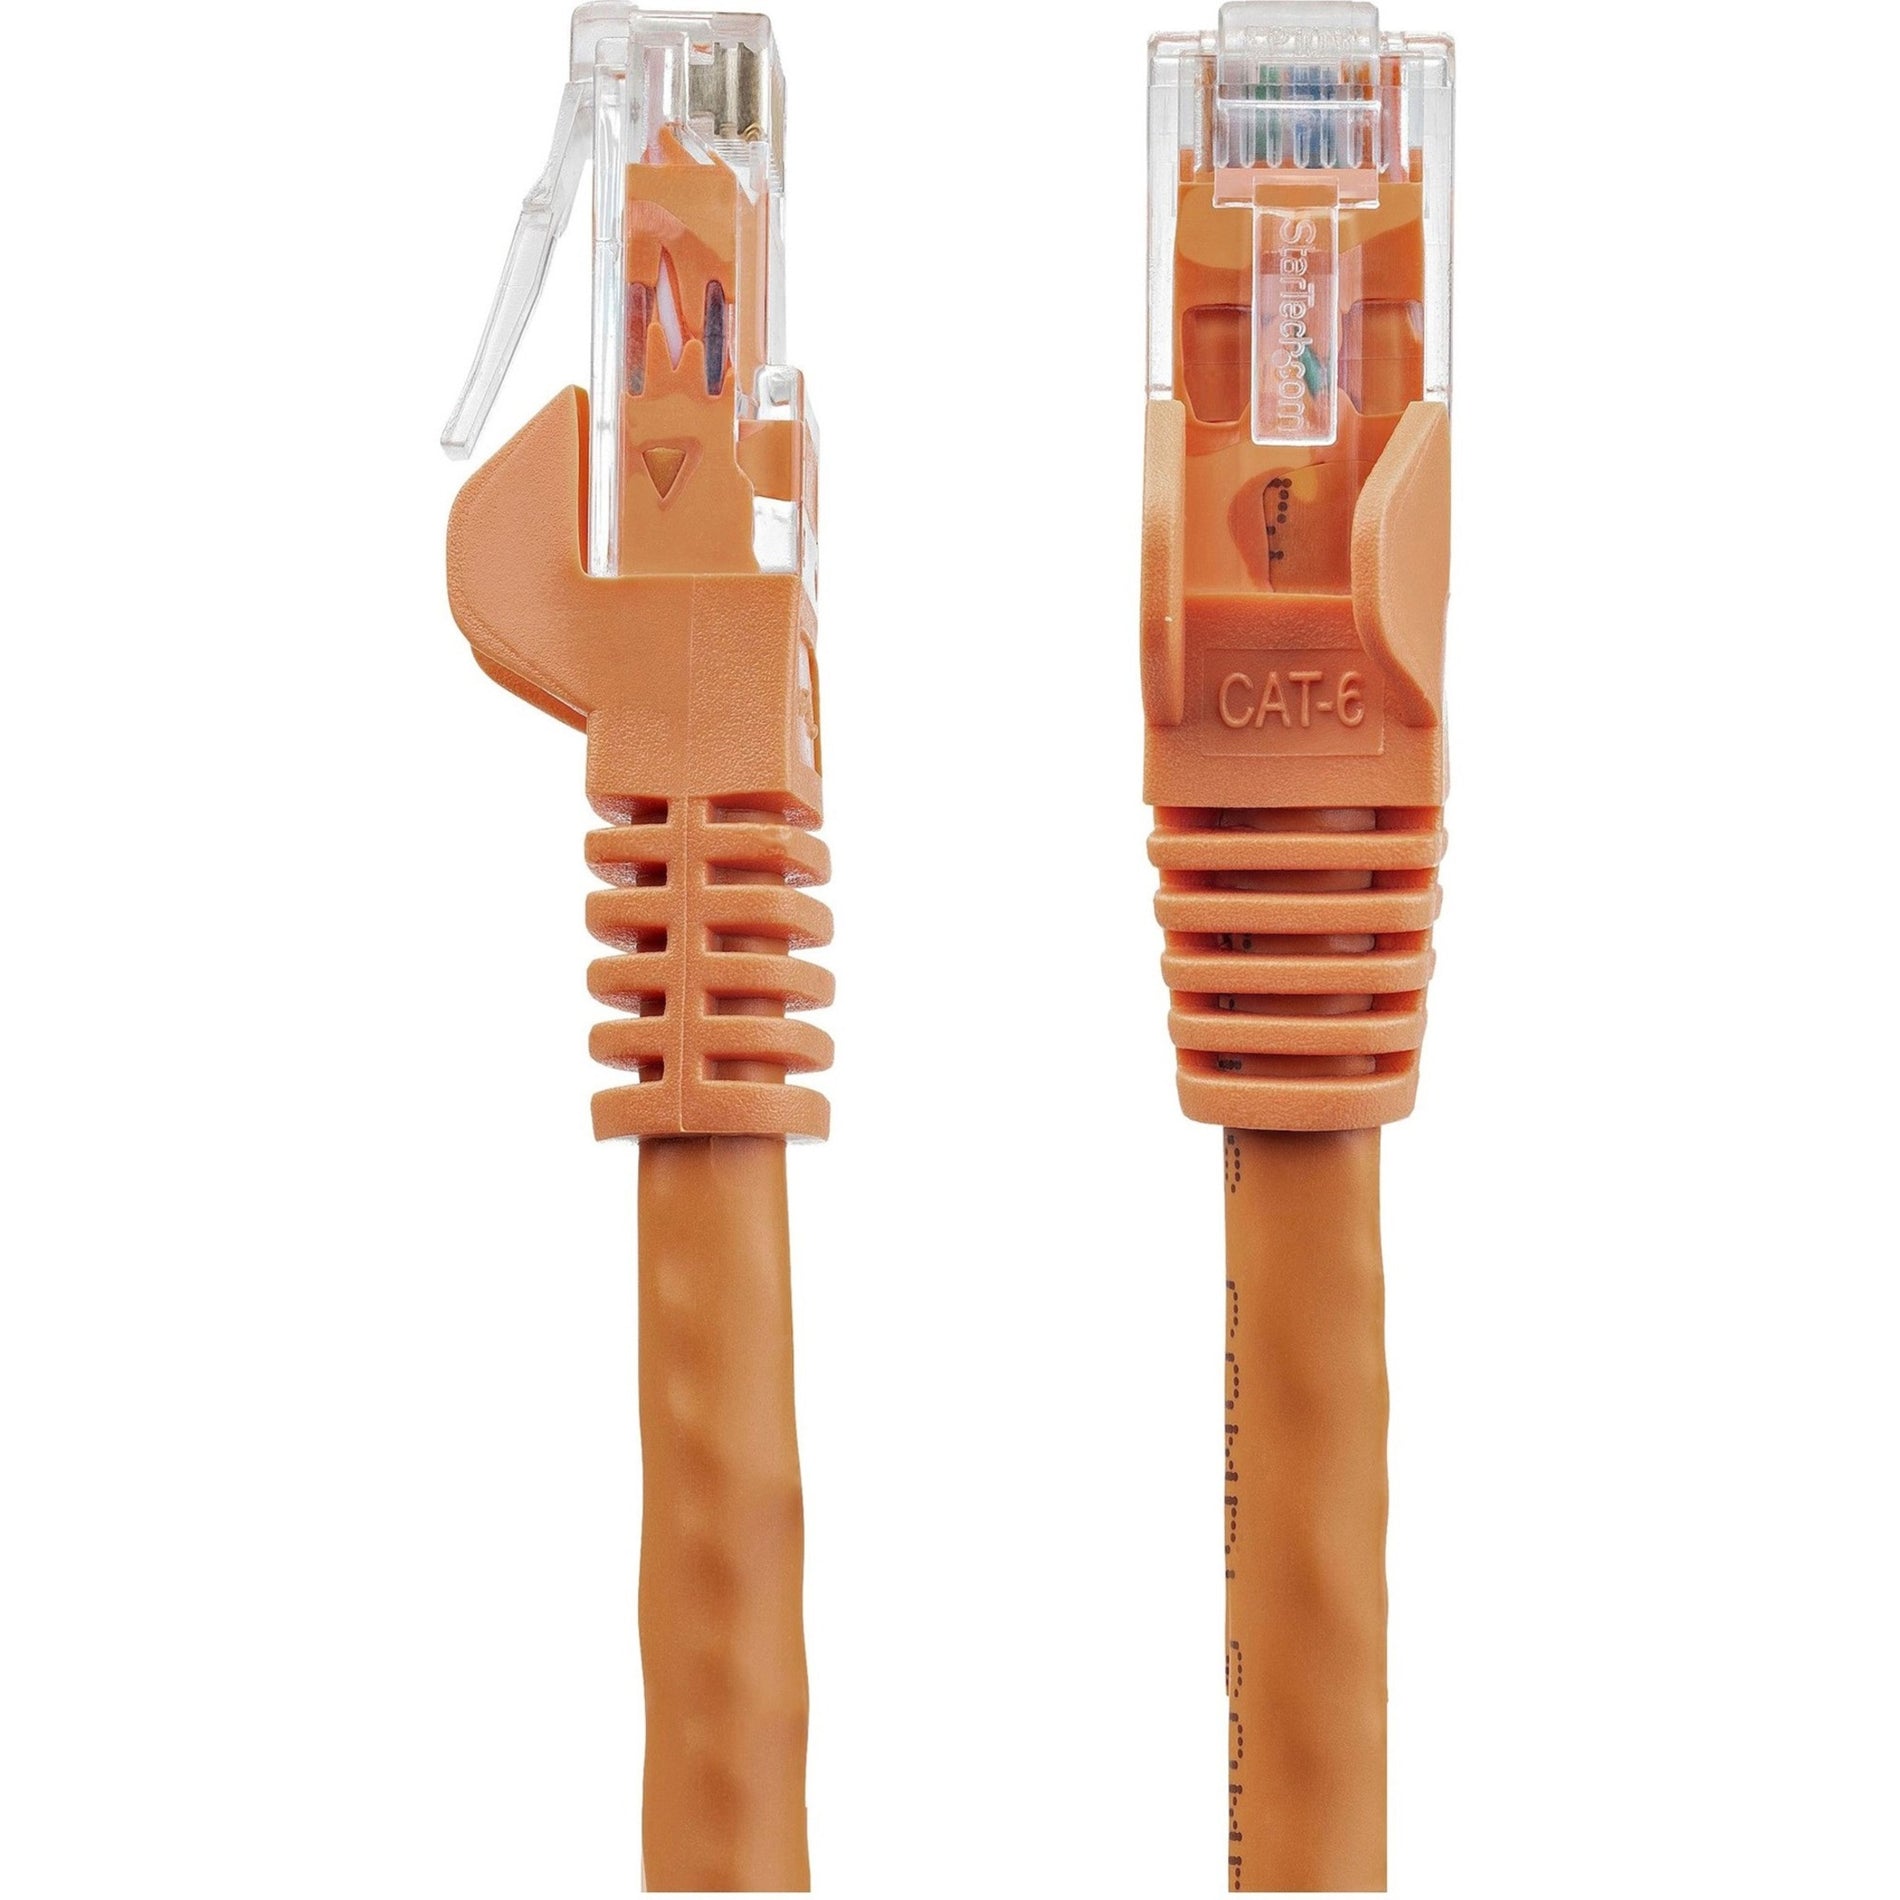 StarTech.com N6PATCH8OR Cat6 UTP Patch Network Cable, 8 ft Orange Ethernet Cable